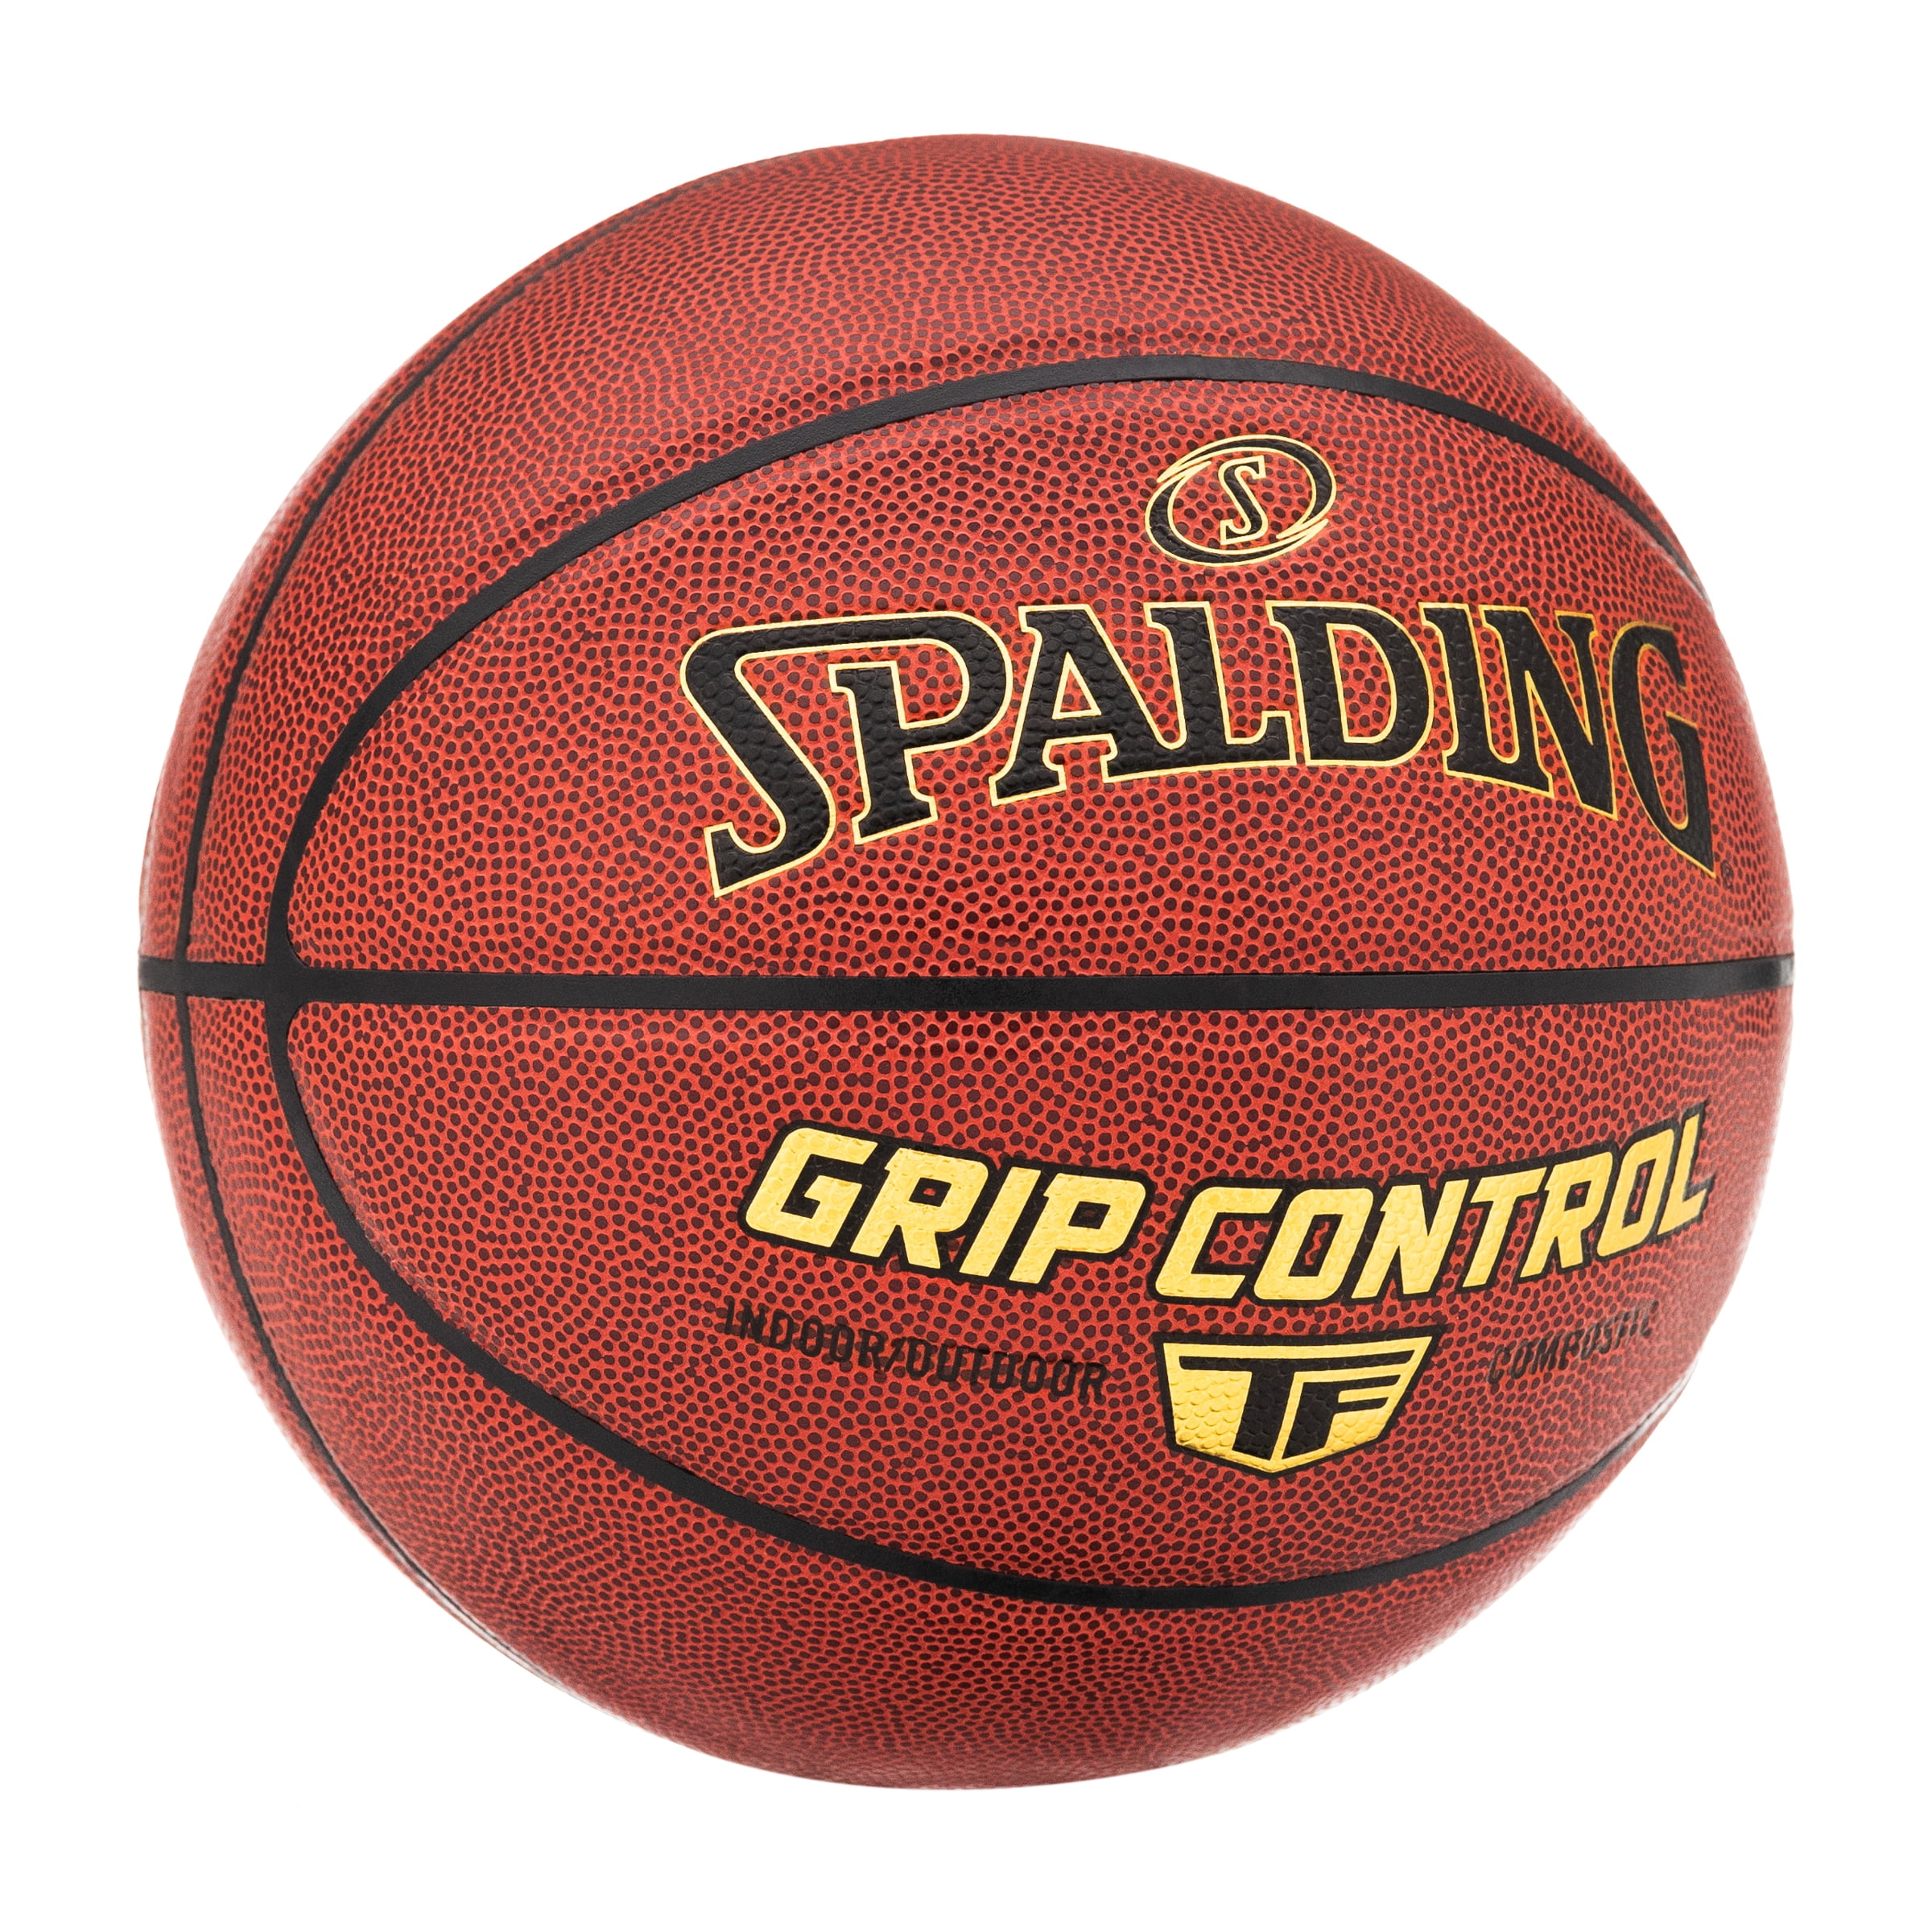 Spalding Junior Flight Size 4 basketball FREE DELIVERY 